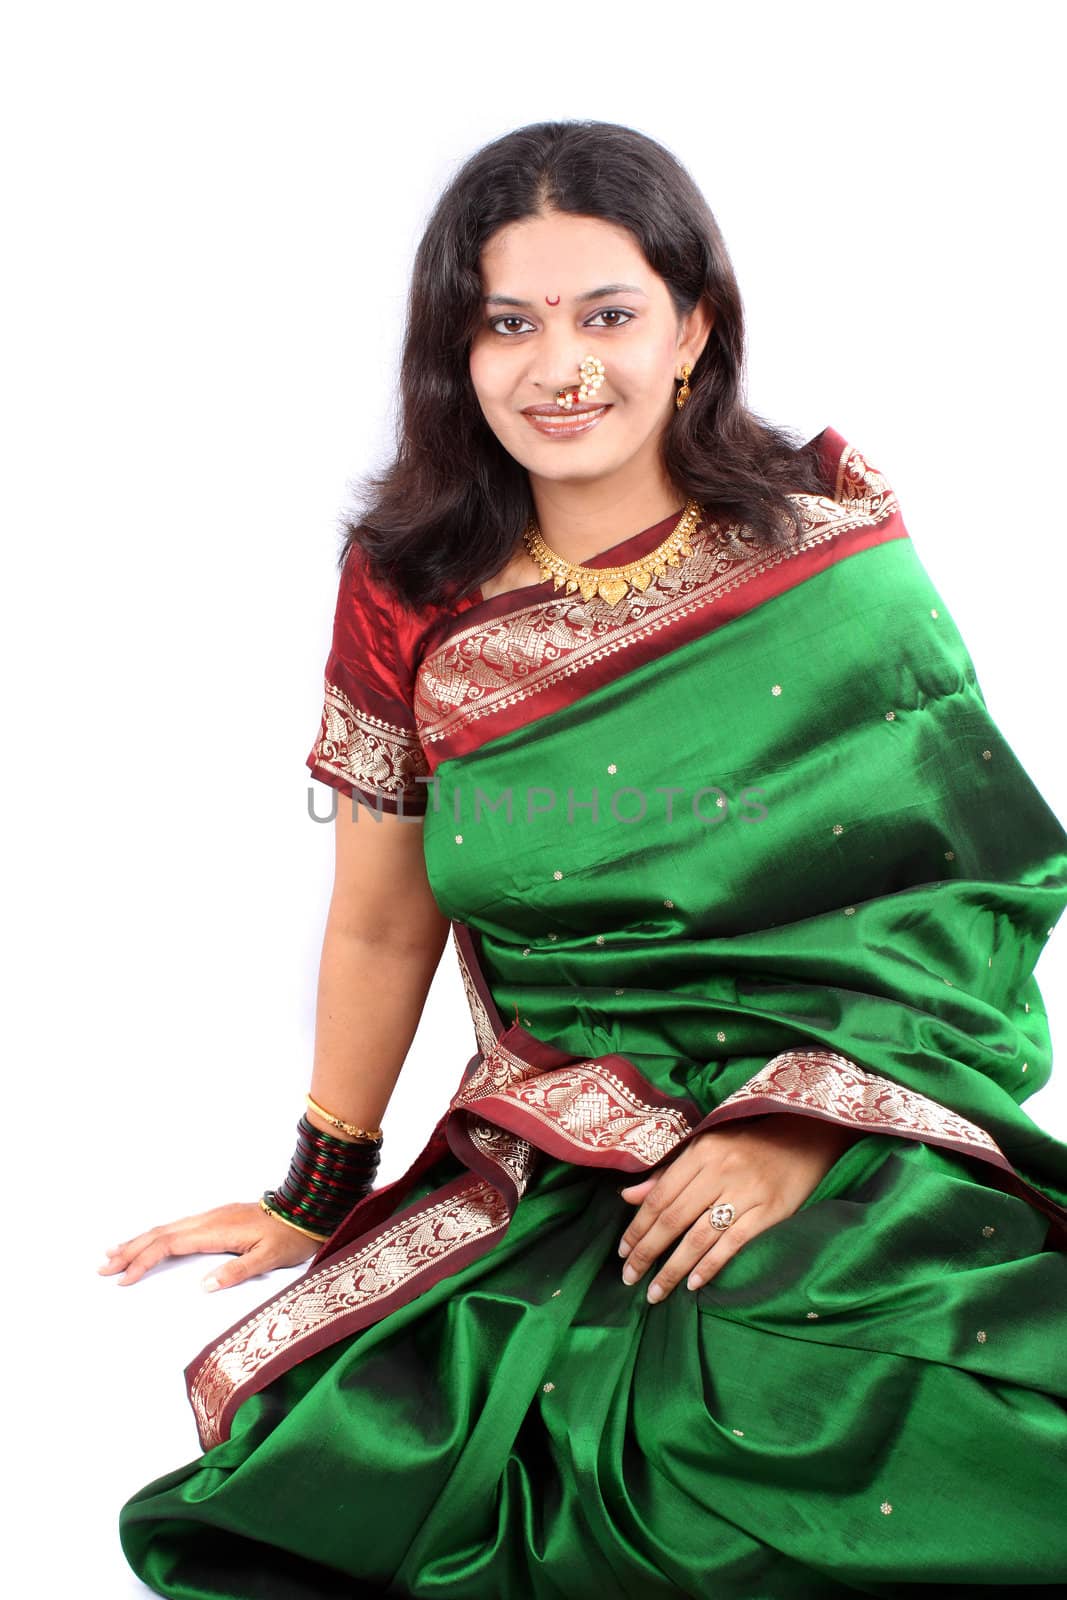 A smiling beautiful woman in traditional Indian sari, on white studio background.